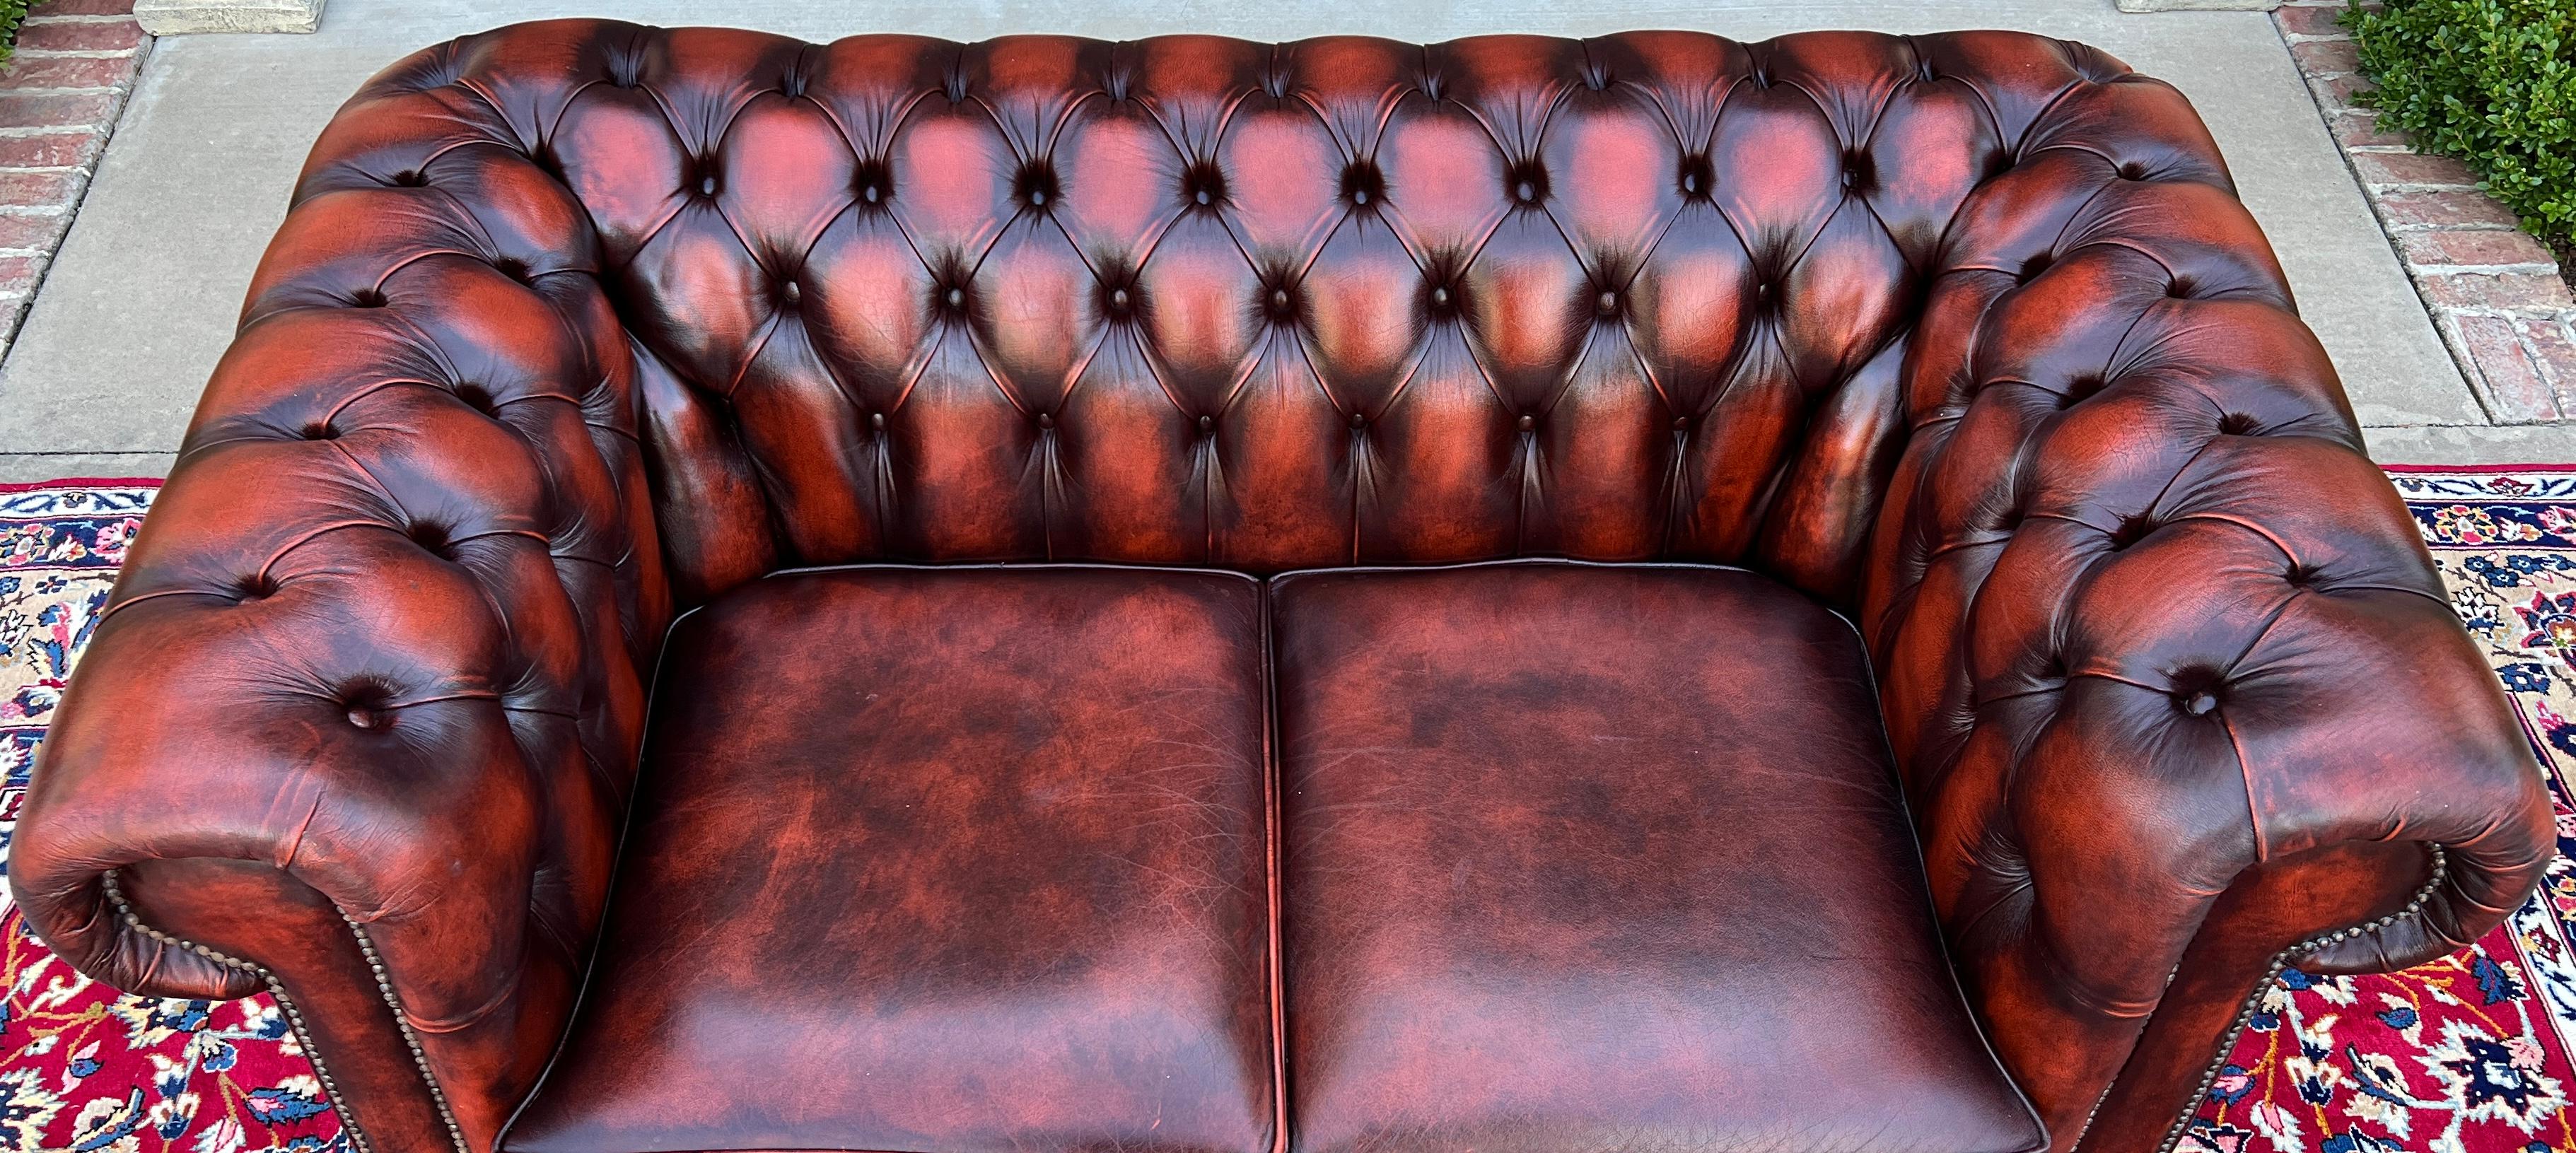 Vintage English Chesterfield Leather Tufted Love Seat Sofa Oxblood Red #2 12